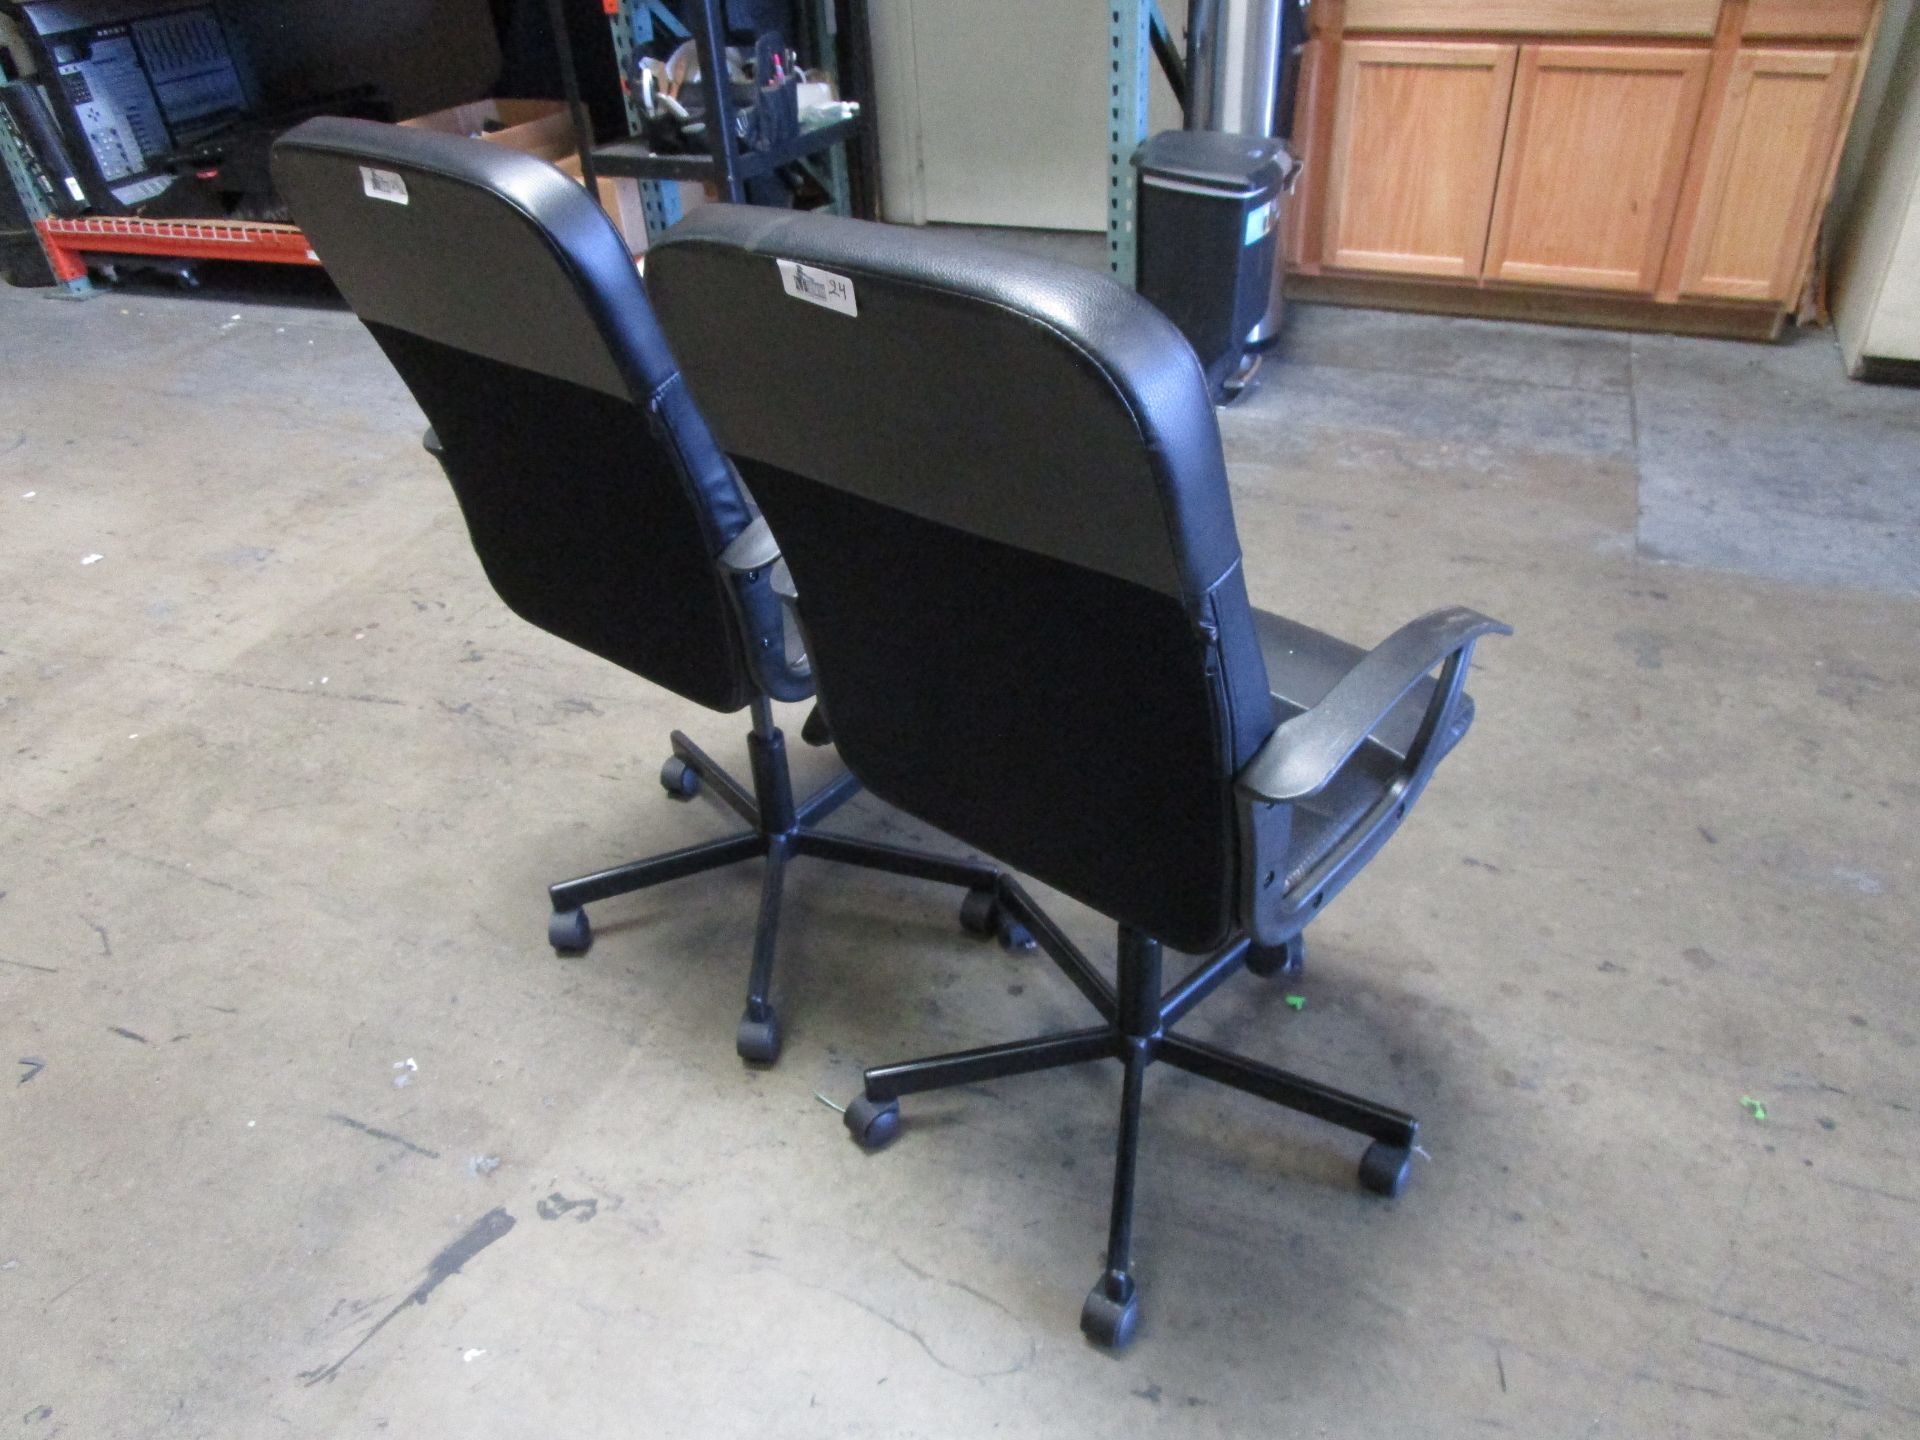 LOT OF 2 IKEA RENBERGET ROLLING DESK CHAIRS - Image 4 of 4